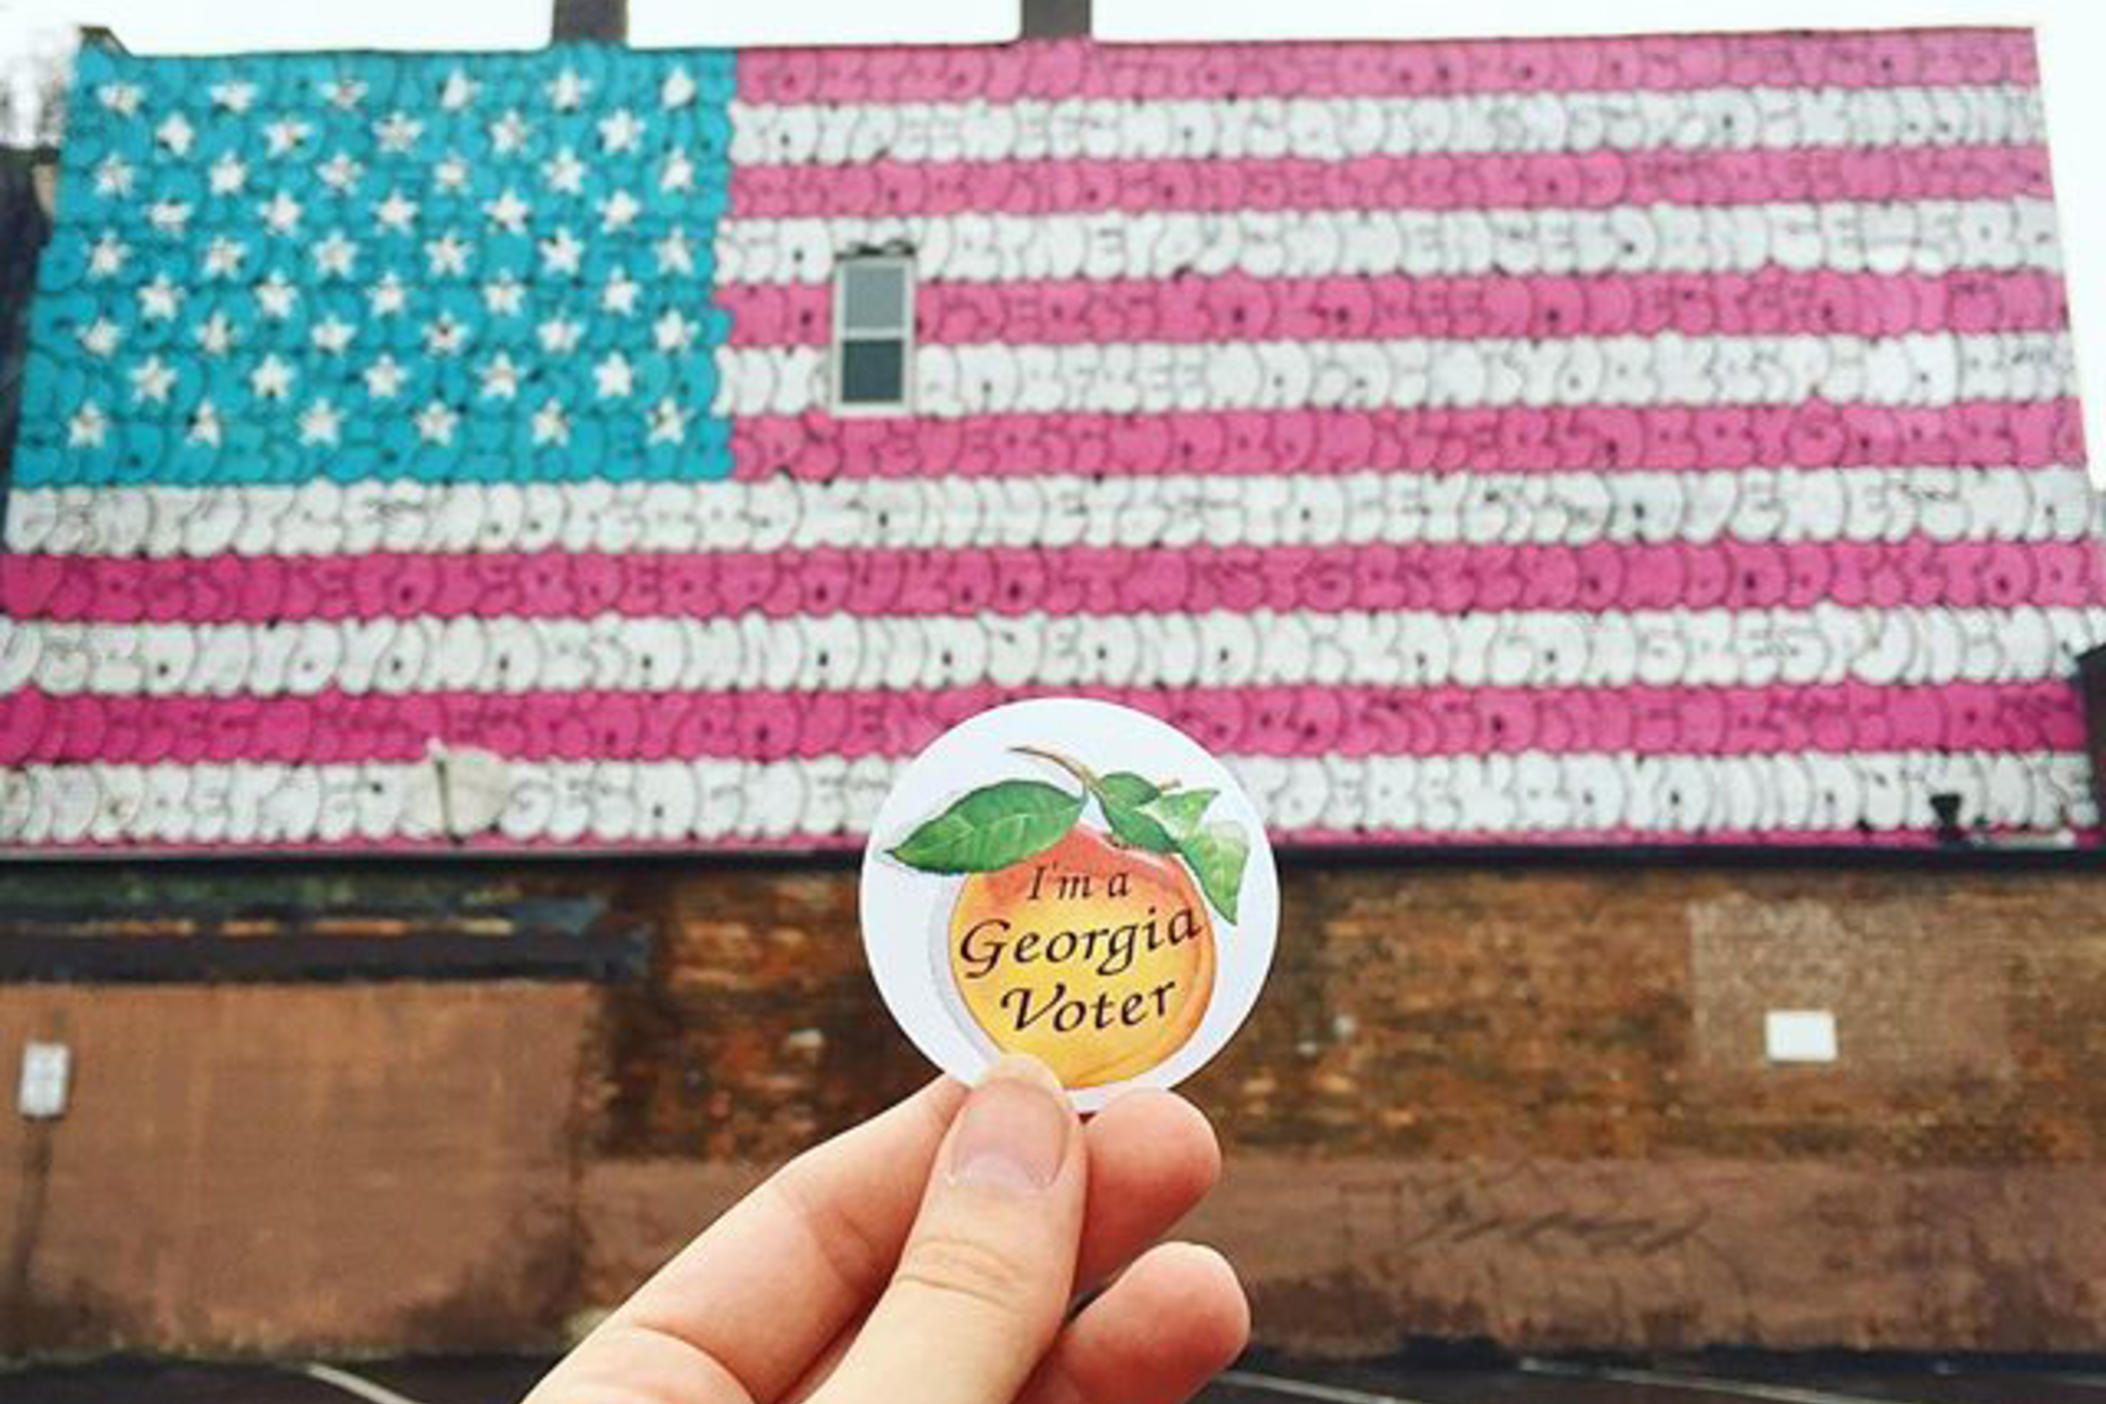 Georgia voter sticker in front of American flag mural